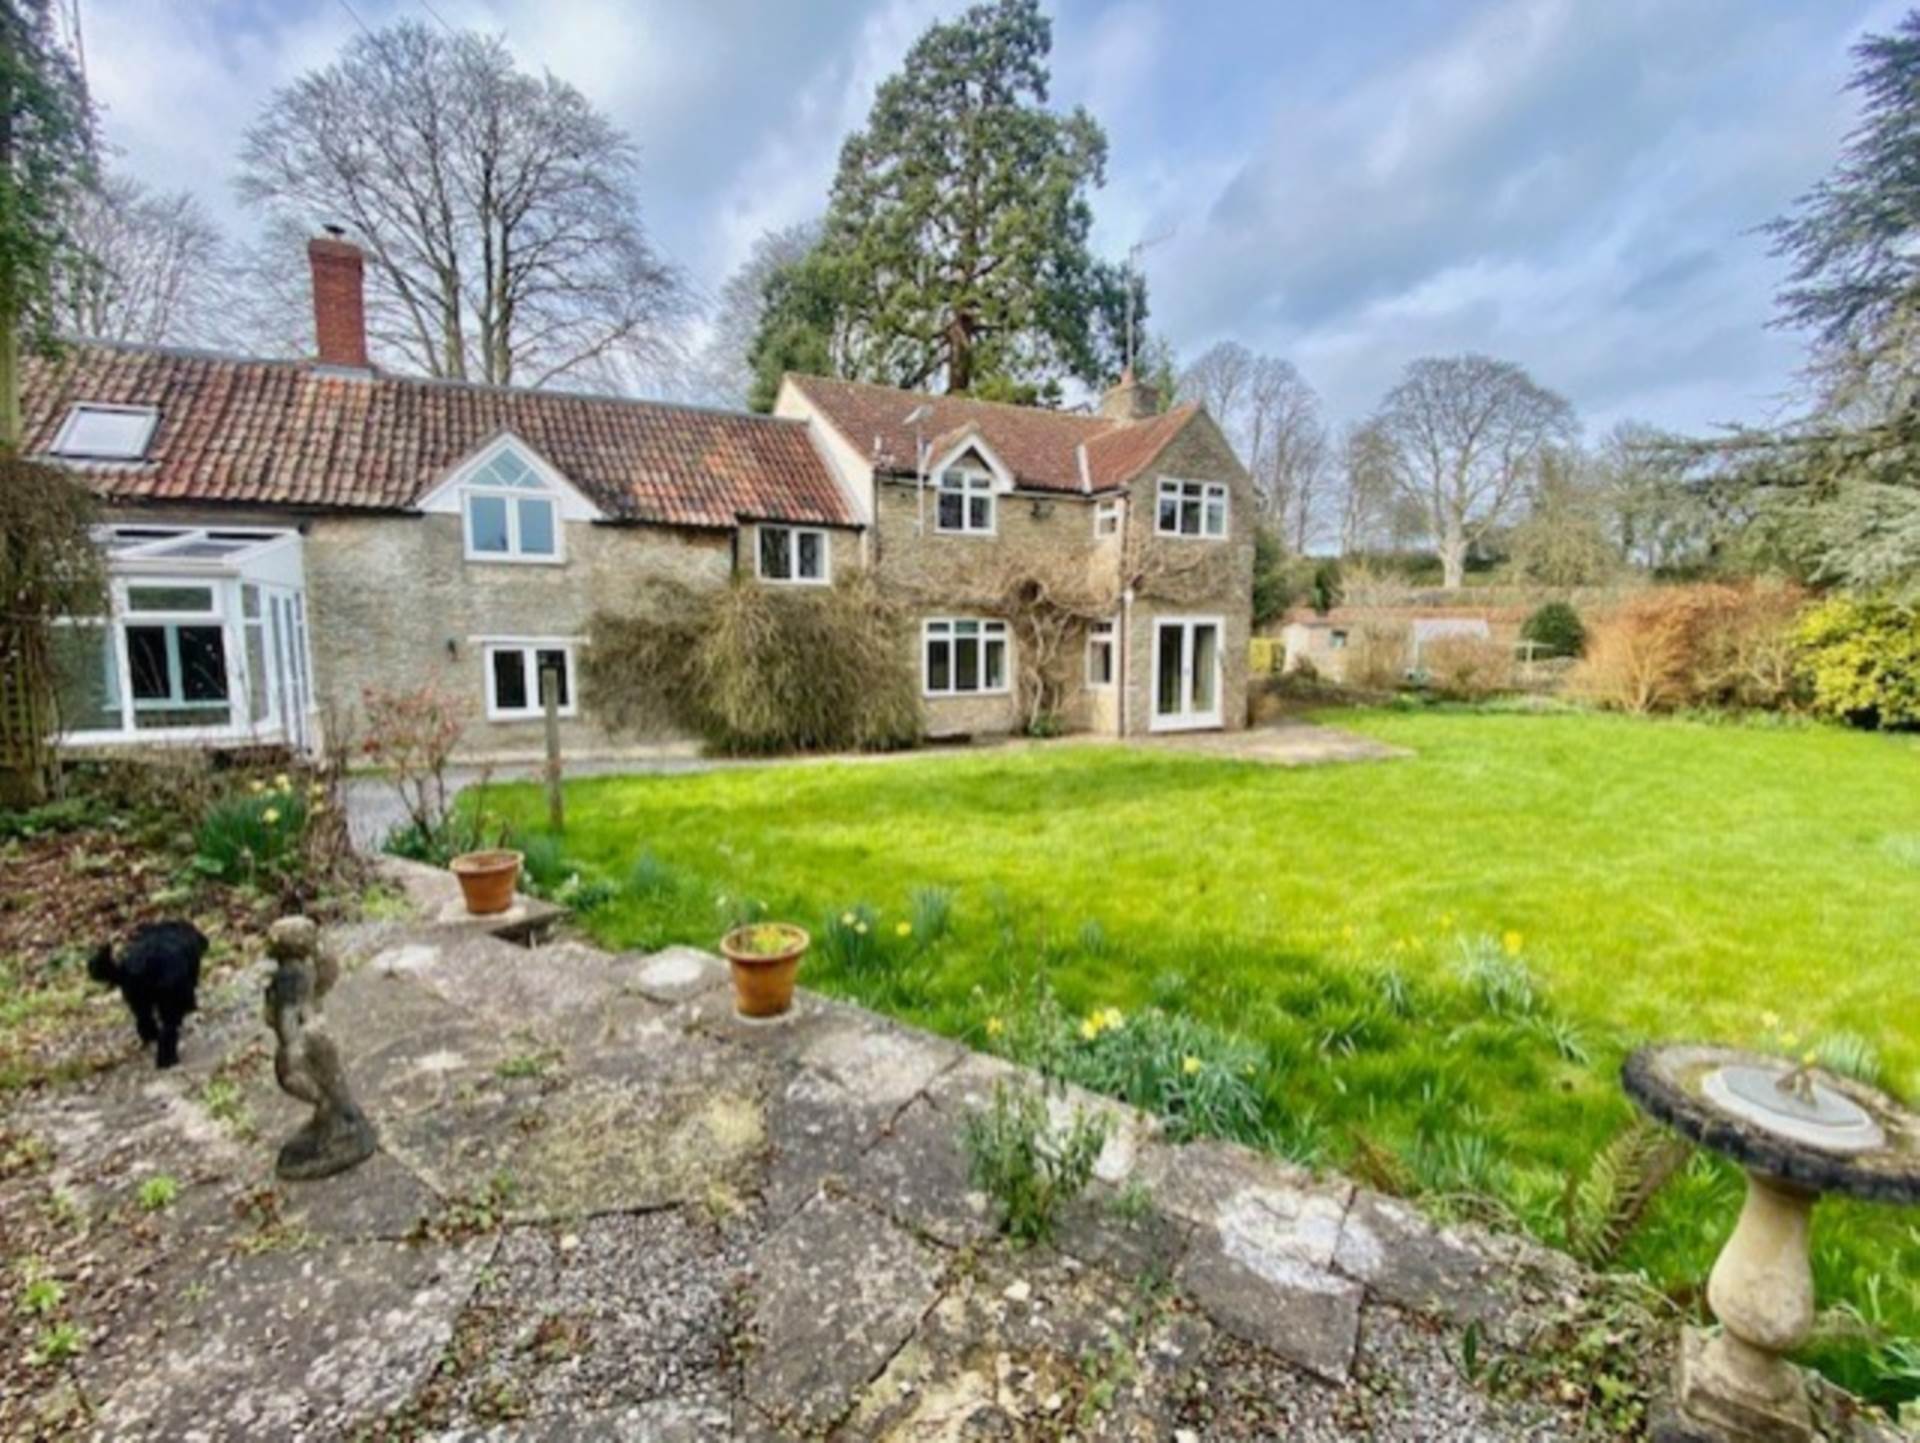 Swallows Property Letting - 4 Bedroom Detached, North Cheriton, Templecombe